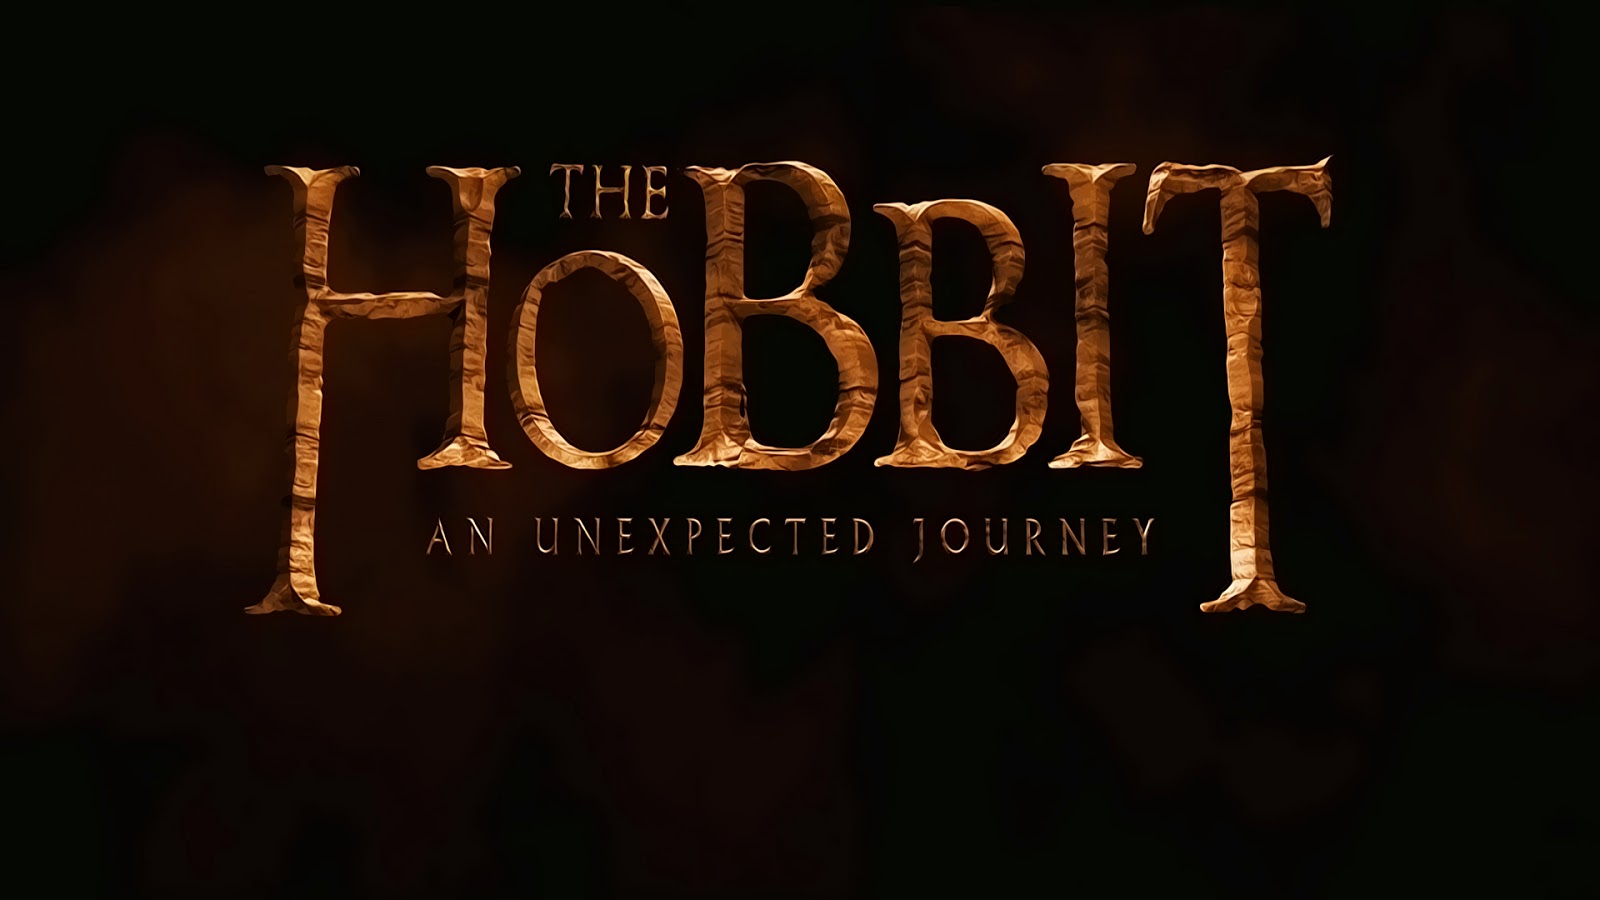 The Hobbit An Unexpected Journey Movie Wallpaper HD Cute